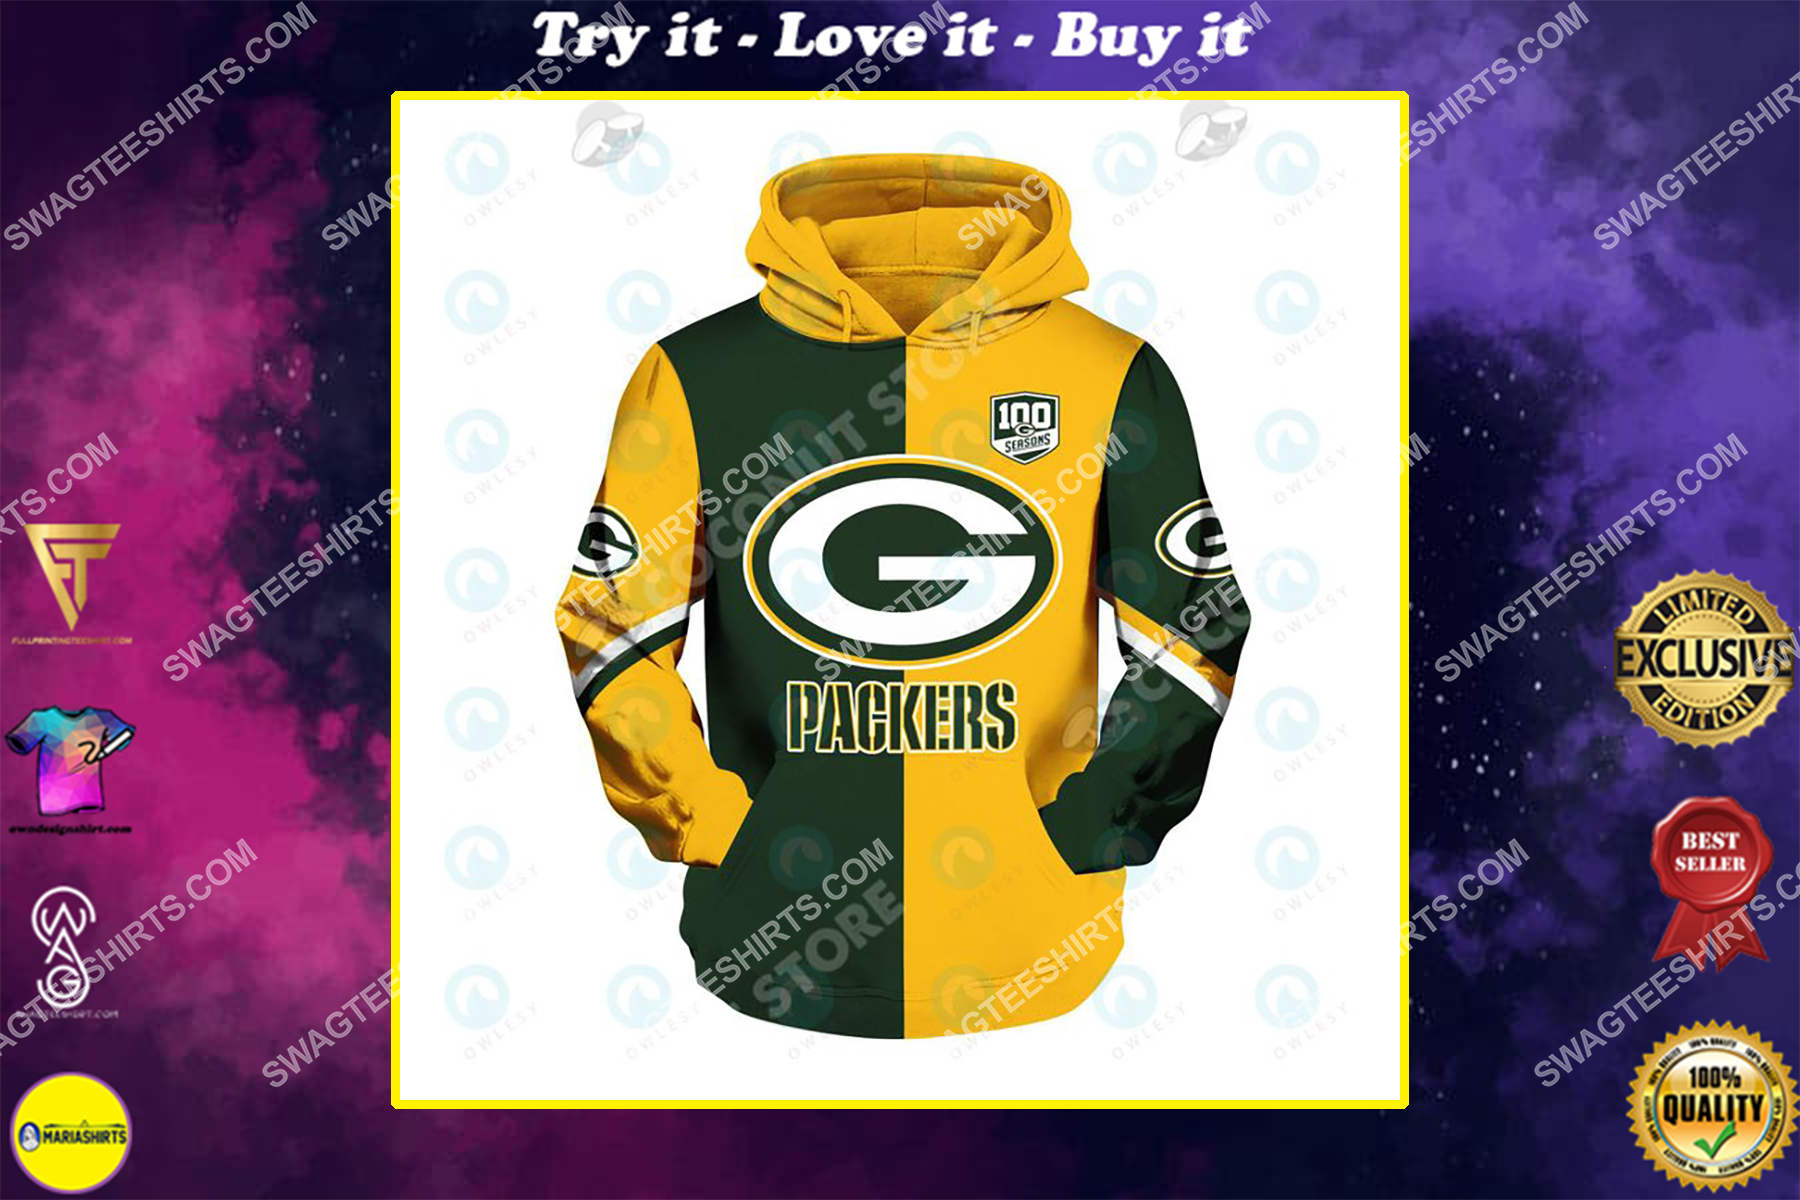 the football team green bay packers all over printed shirt